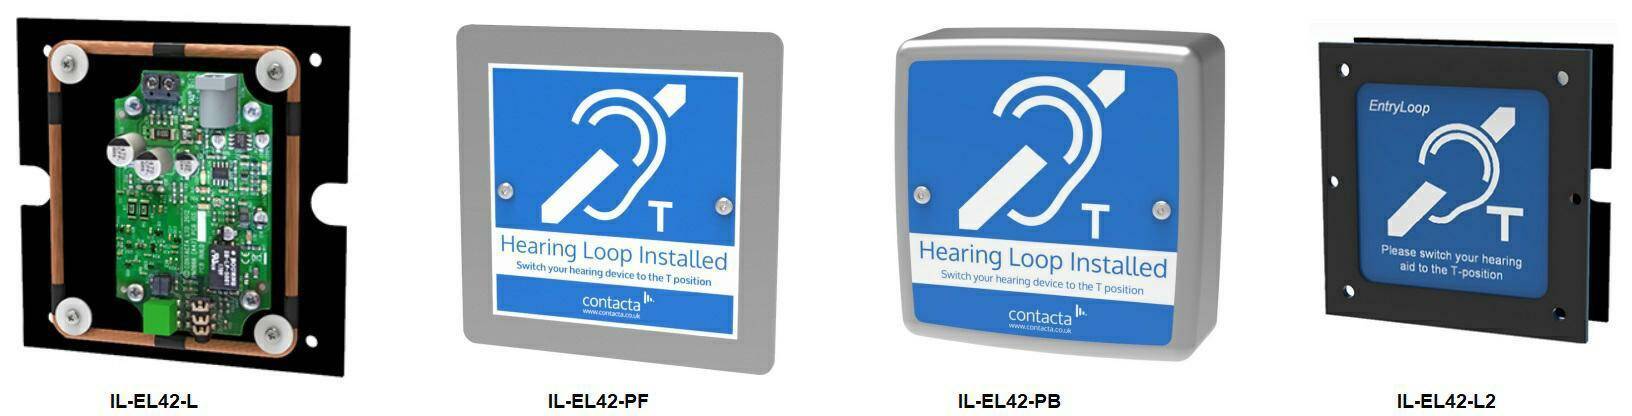 Induction loop for installation in infokiosk